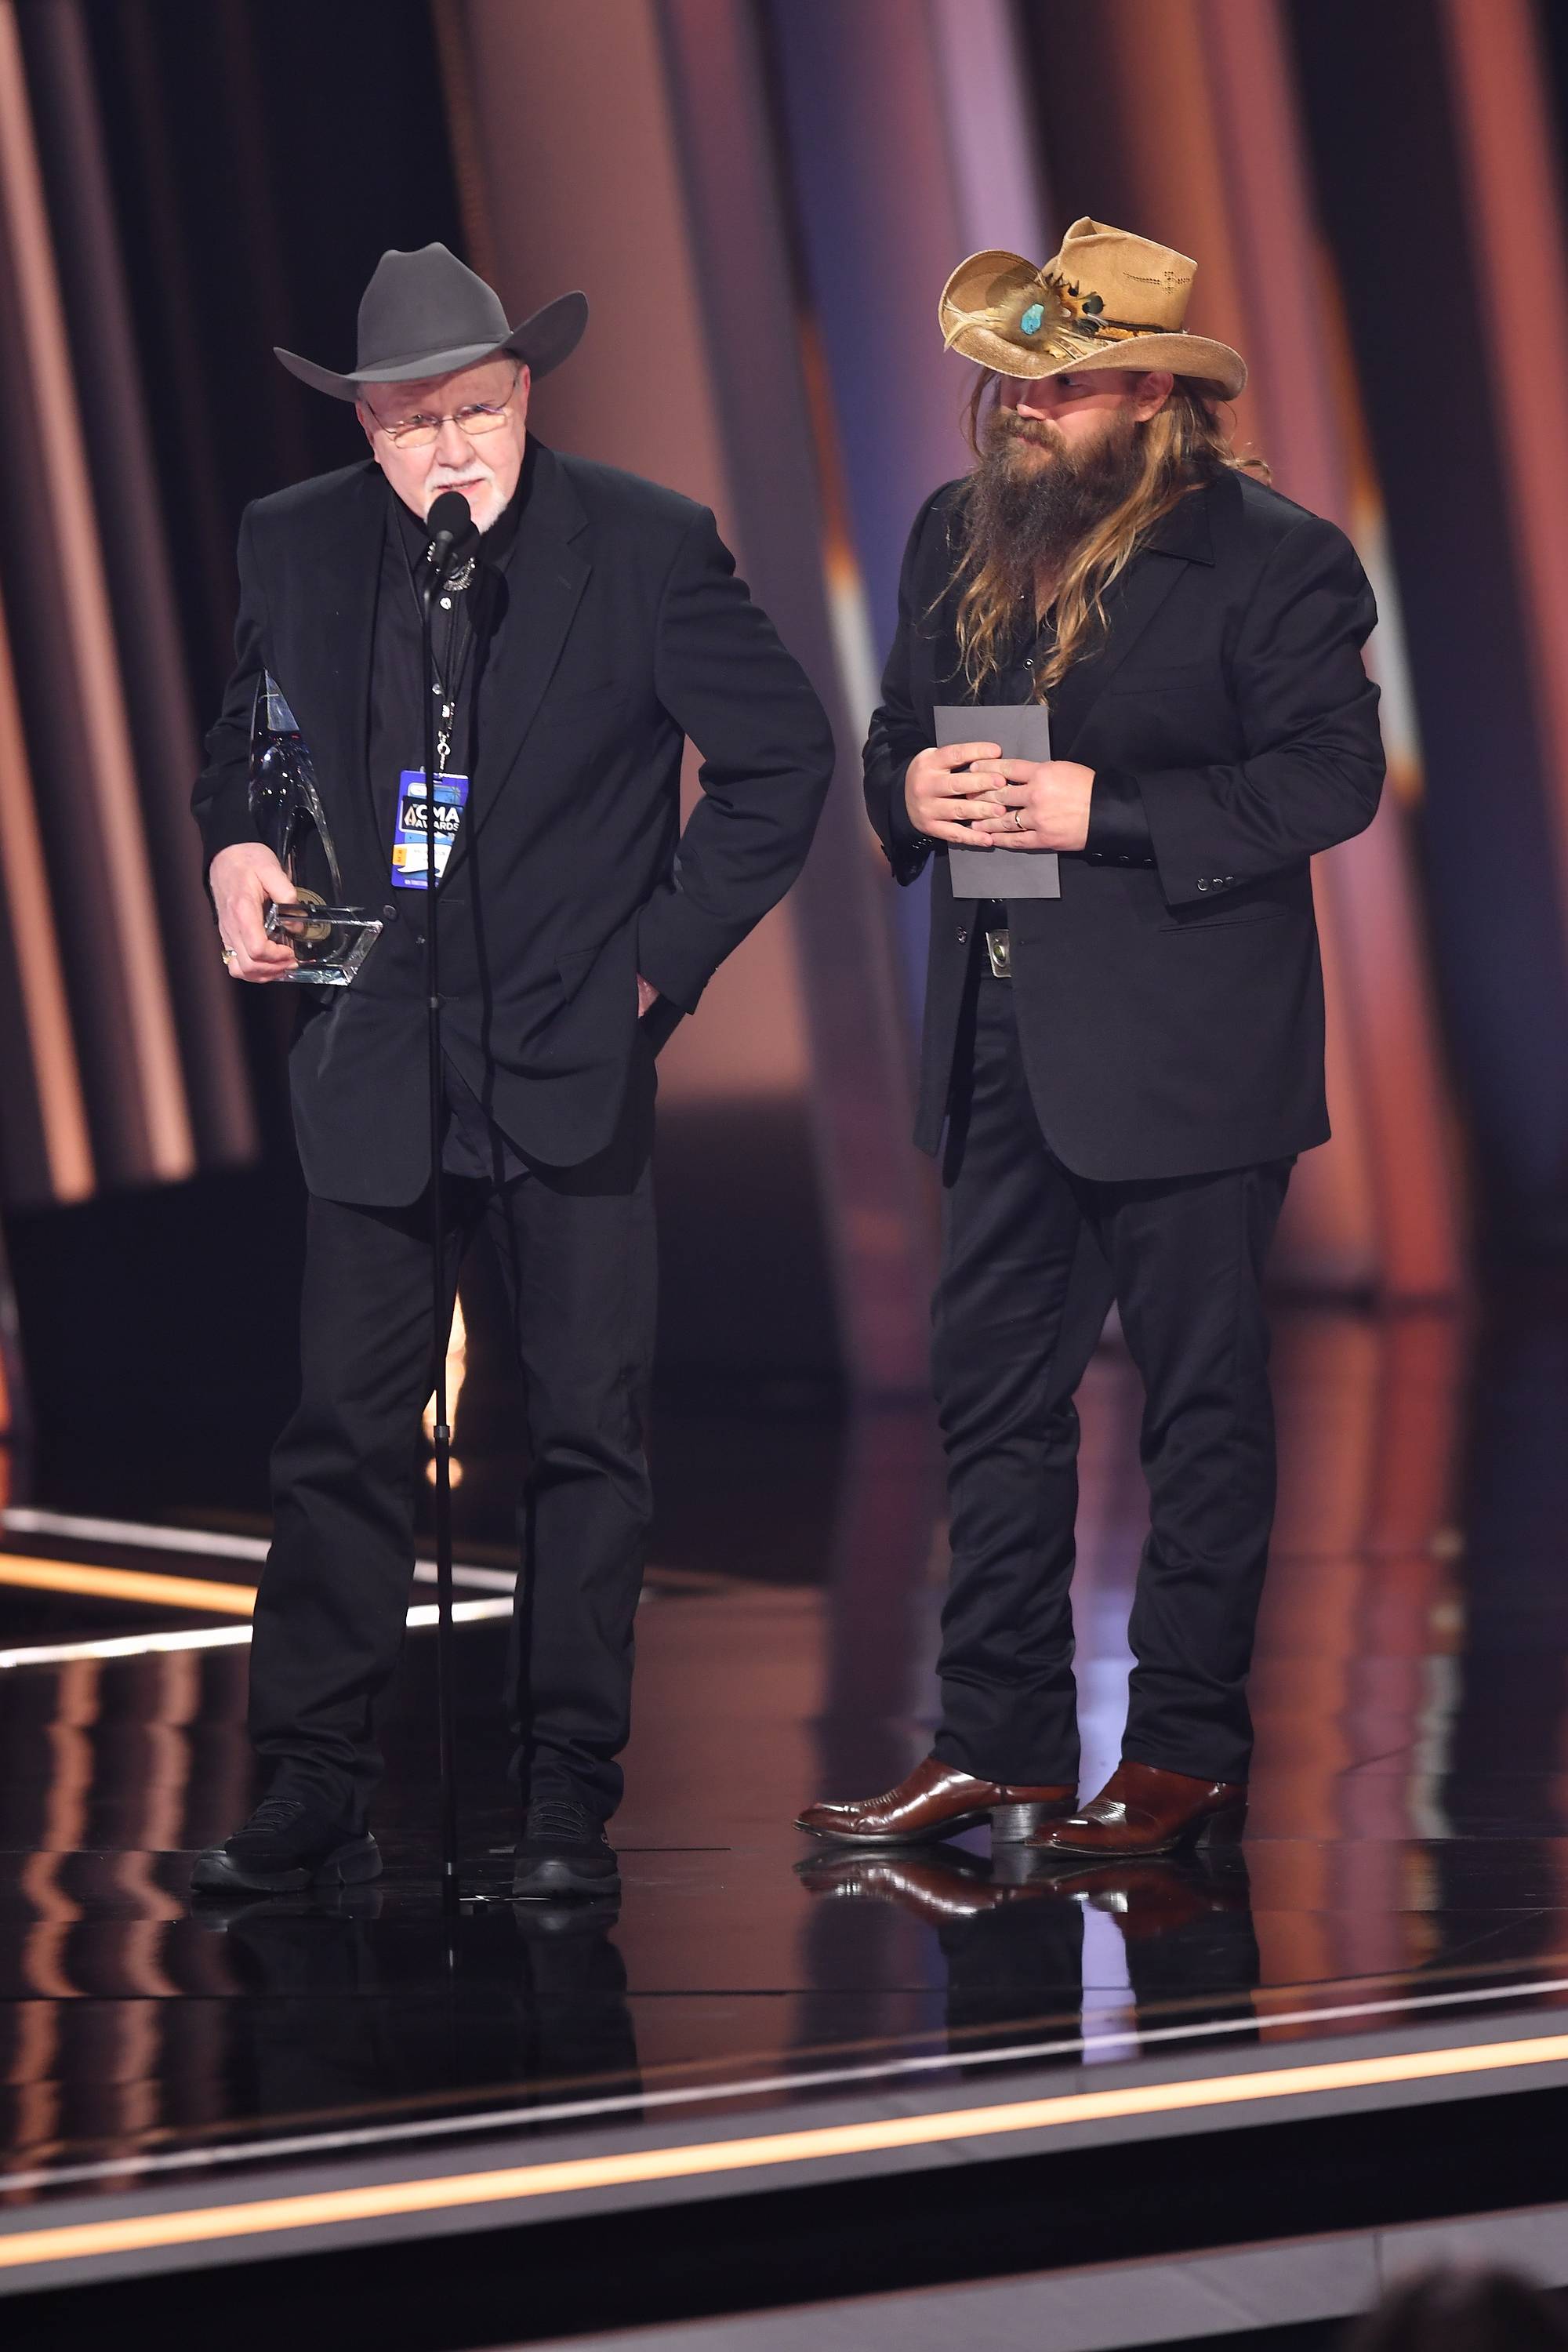 55th CMA Awards: Chris Stapleton Dominates and Other Winners | News | CMT